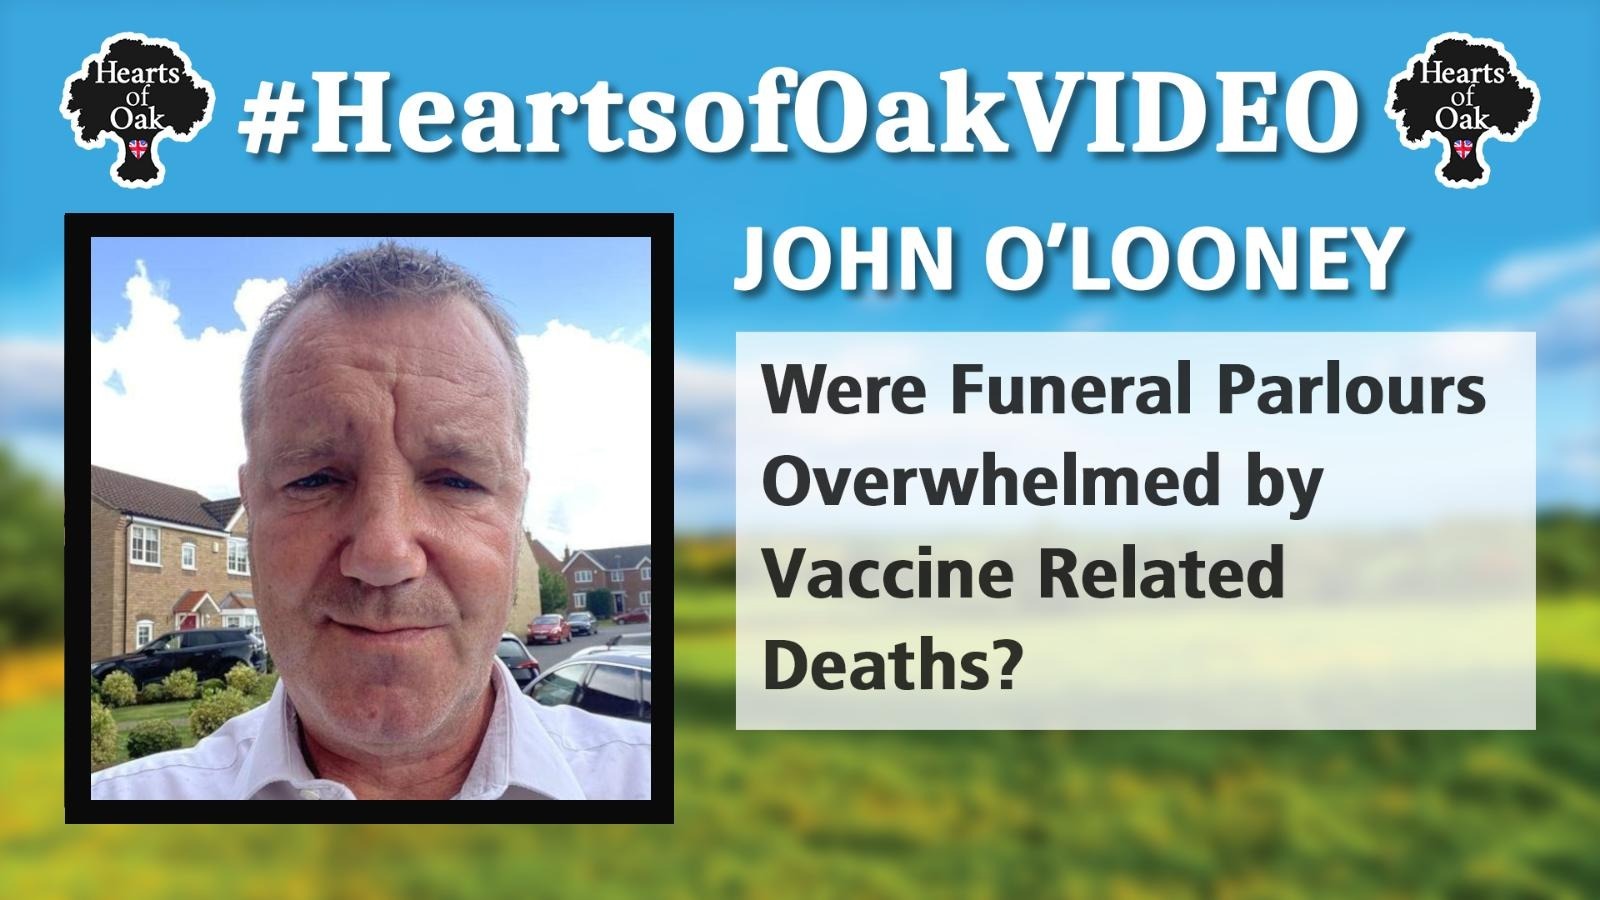 John O’Looney - Were Funeral Parlours Overwhelmed by Vaccine Related Deaths?